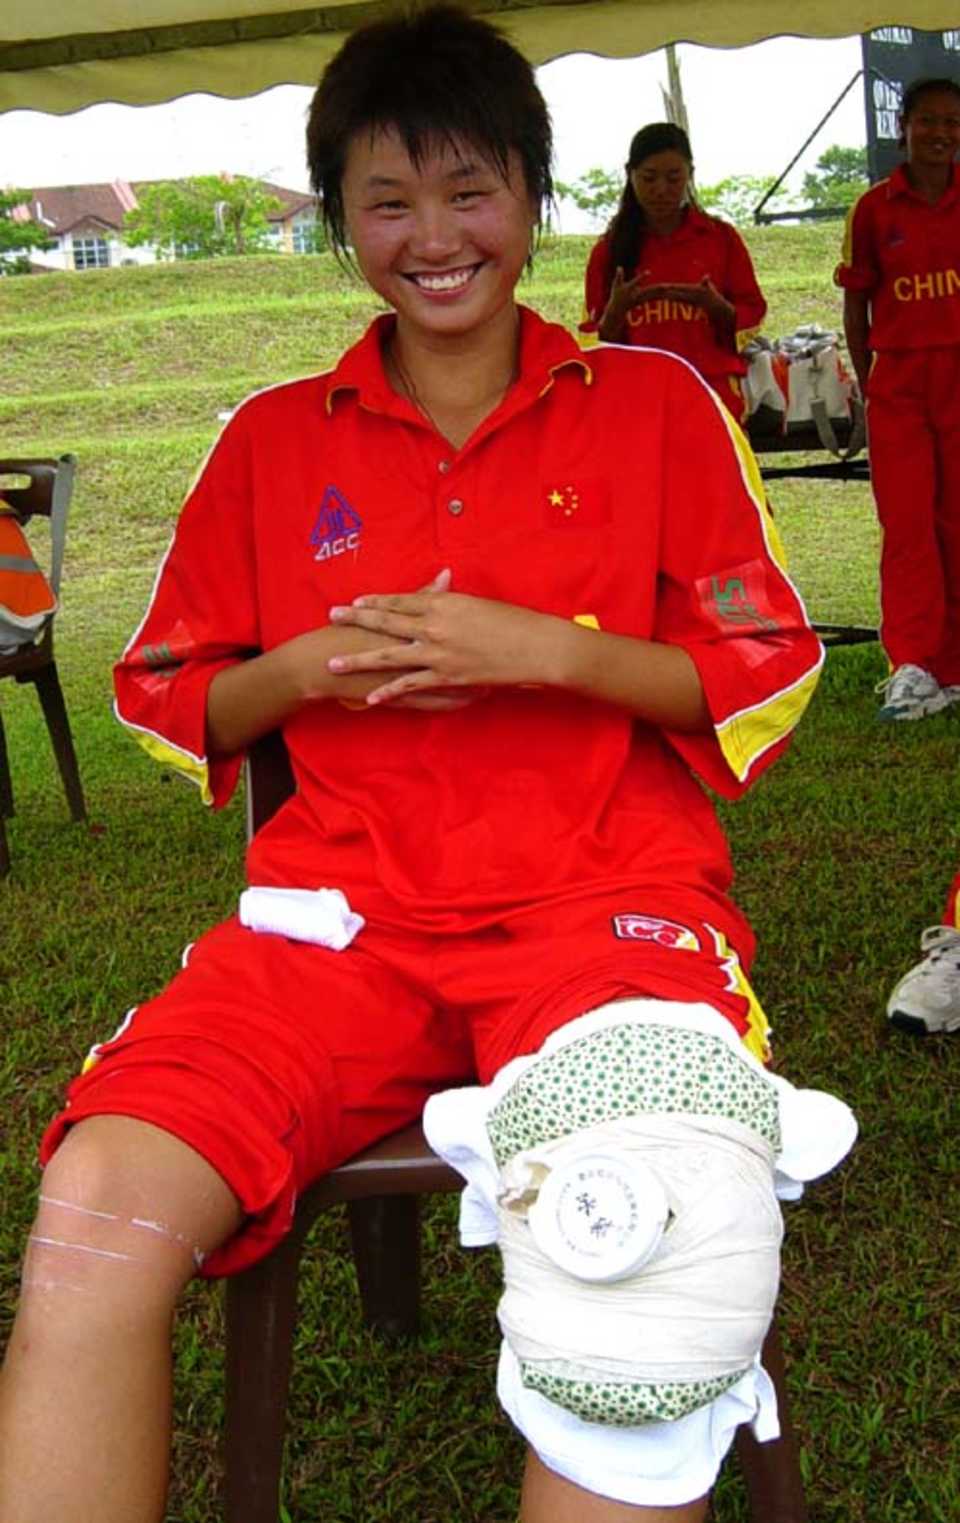 Playing with a strained ligament, Hu Ting Ting added 31 runs with Duan Qiong to take China to a seven-wicket victory over UAE, China v UAE, ACC women's tournament, Johor, July 14, 2007